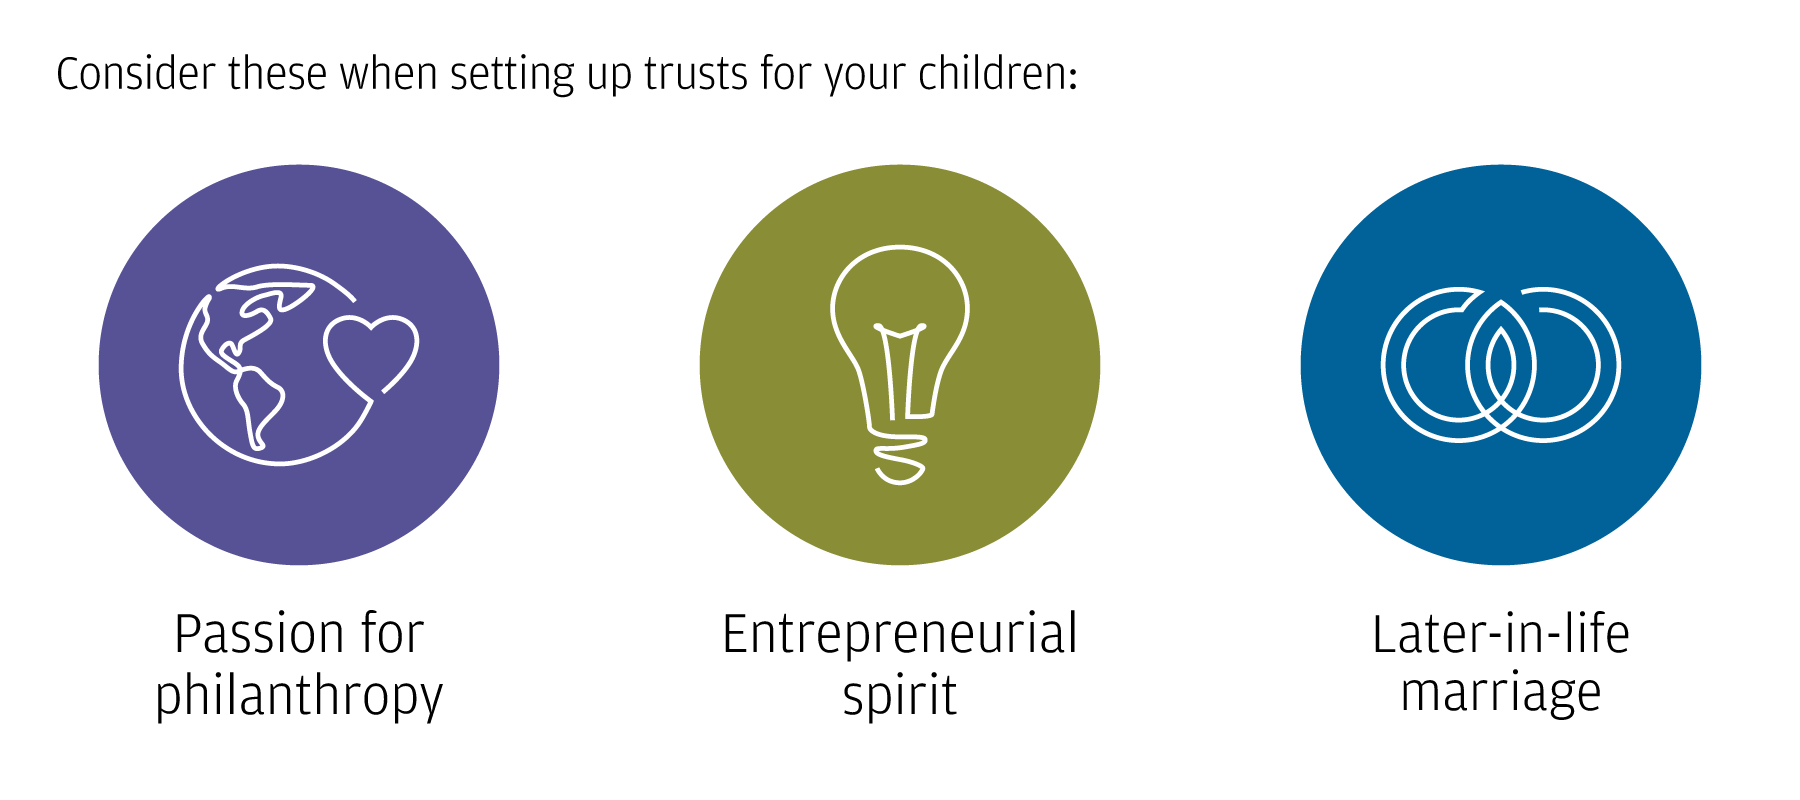 Consider these when setting up trusts for your children: 1.Passion for philanthropy 2.Entrepreneurial spirit 3Later-in-life marriage